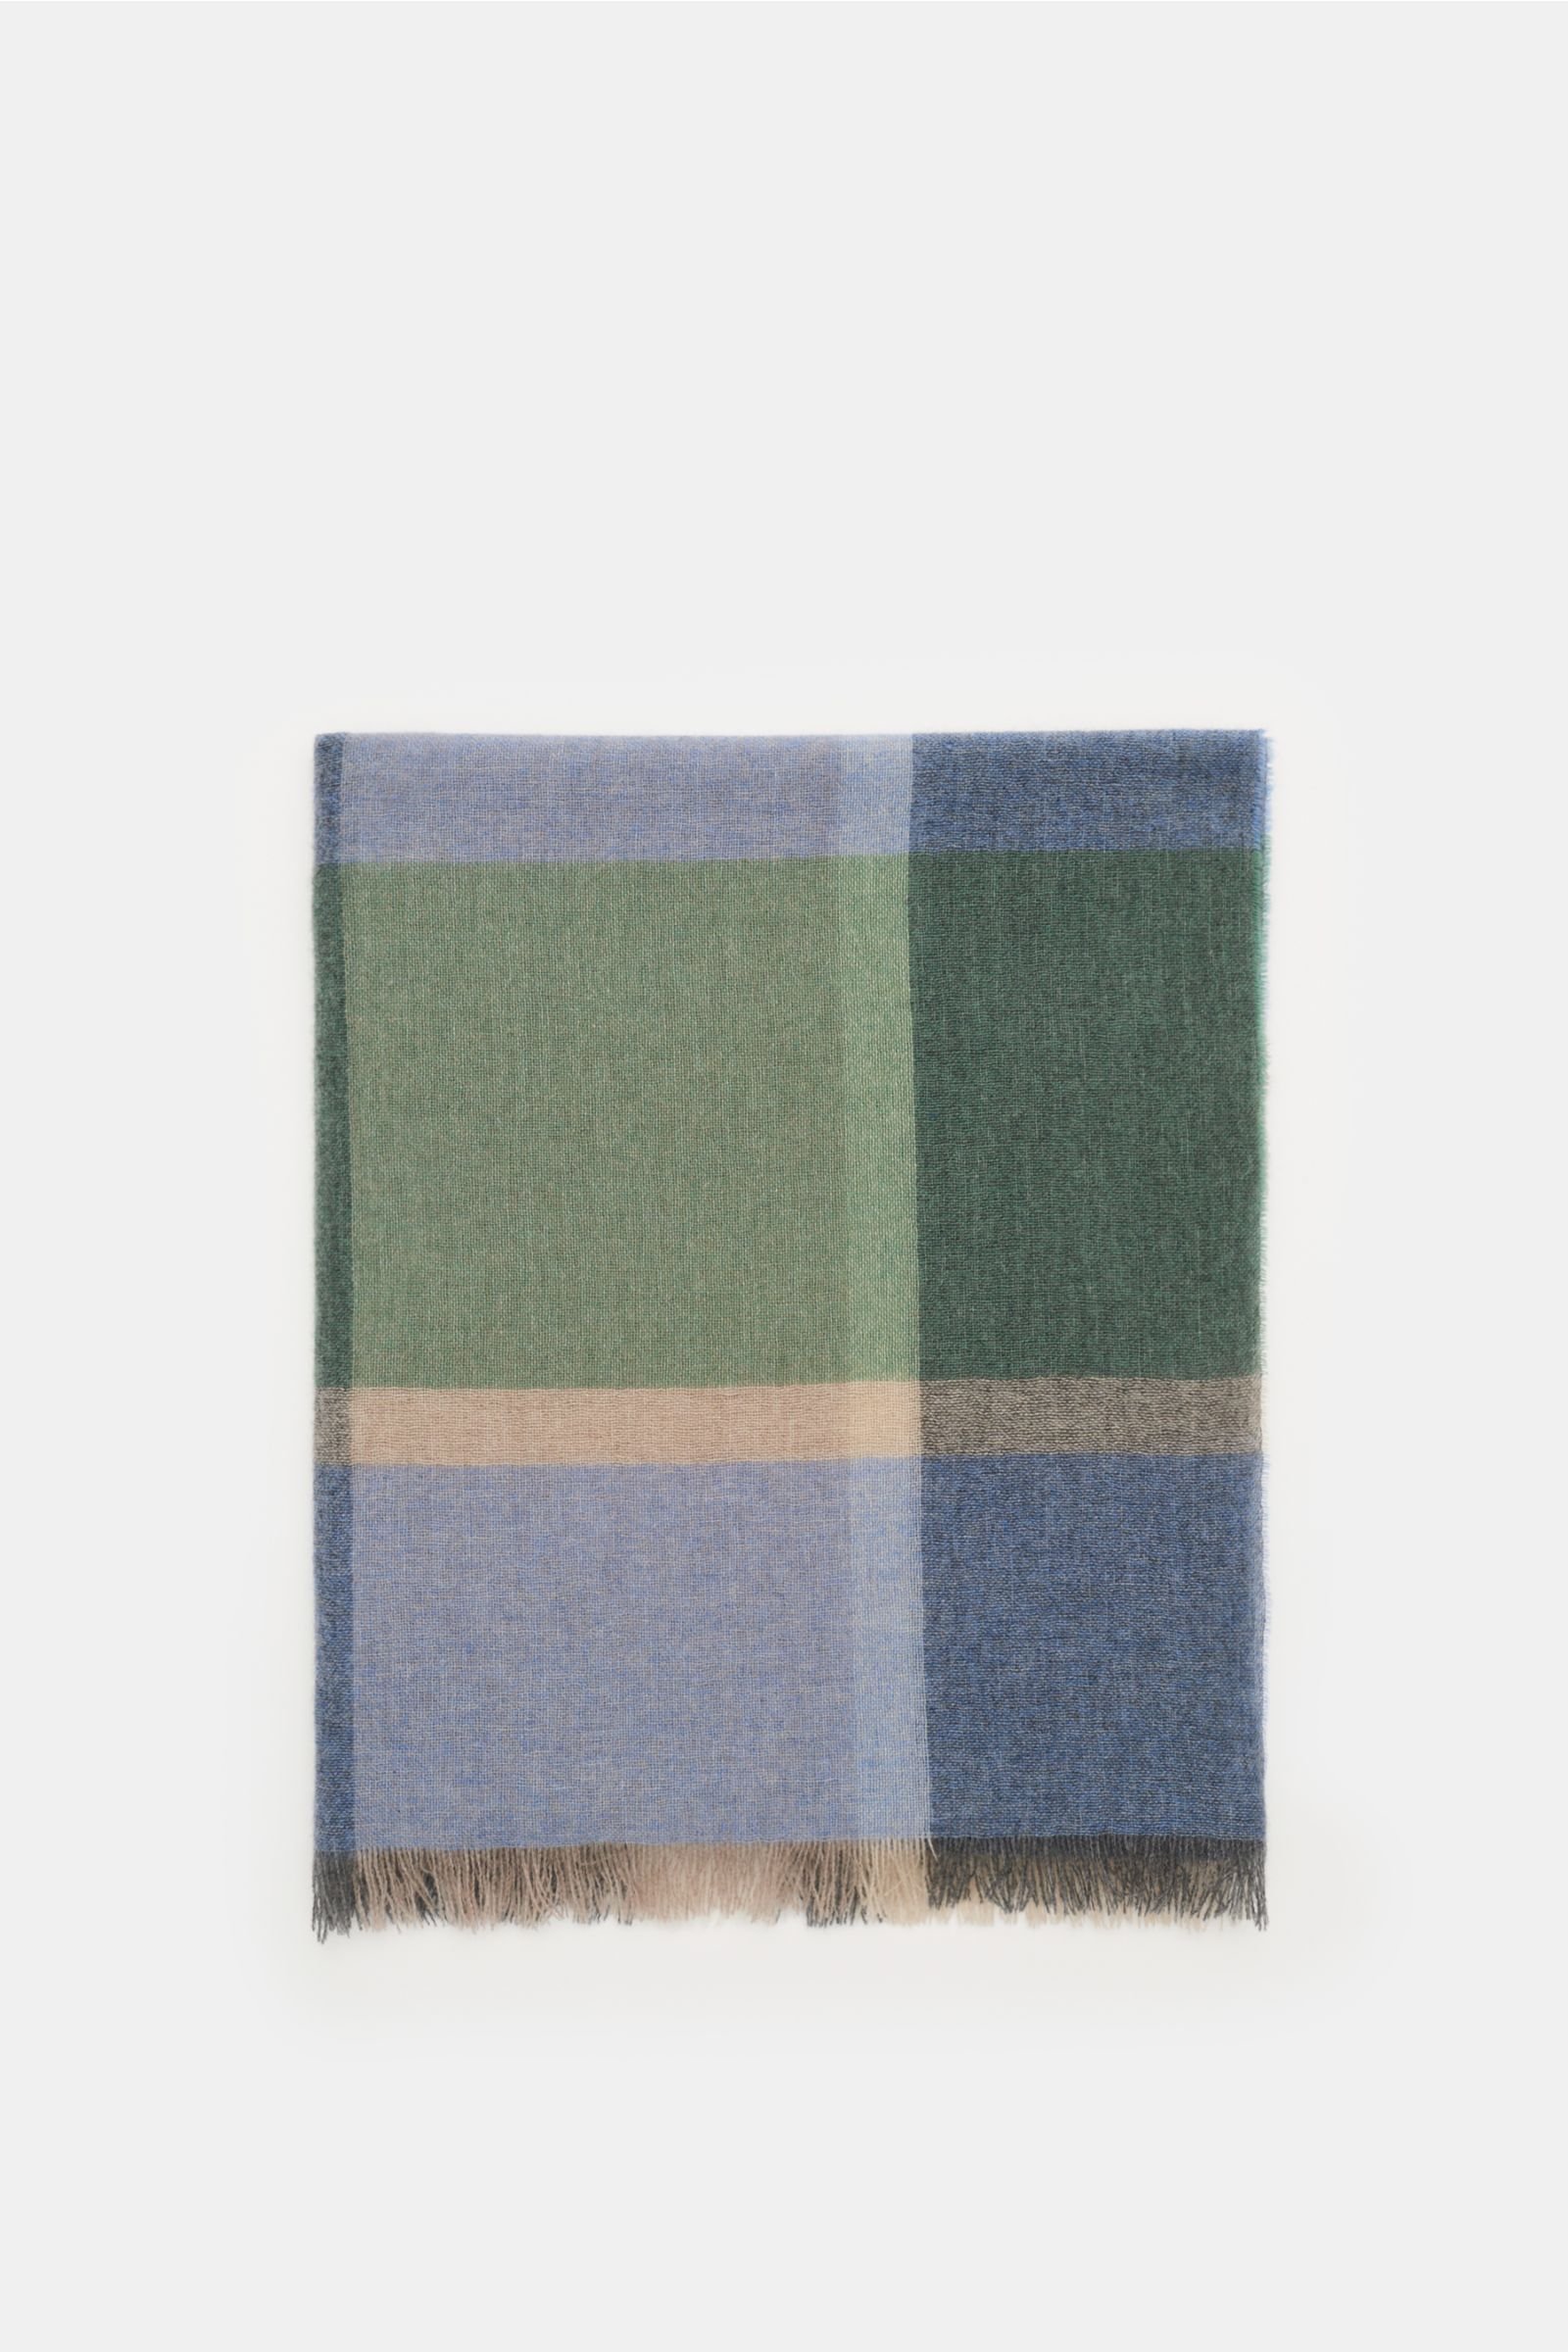 Cashmere scarf 'Ortisei' mint green/grey-blue, checked